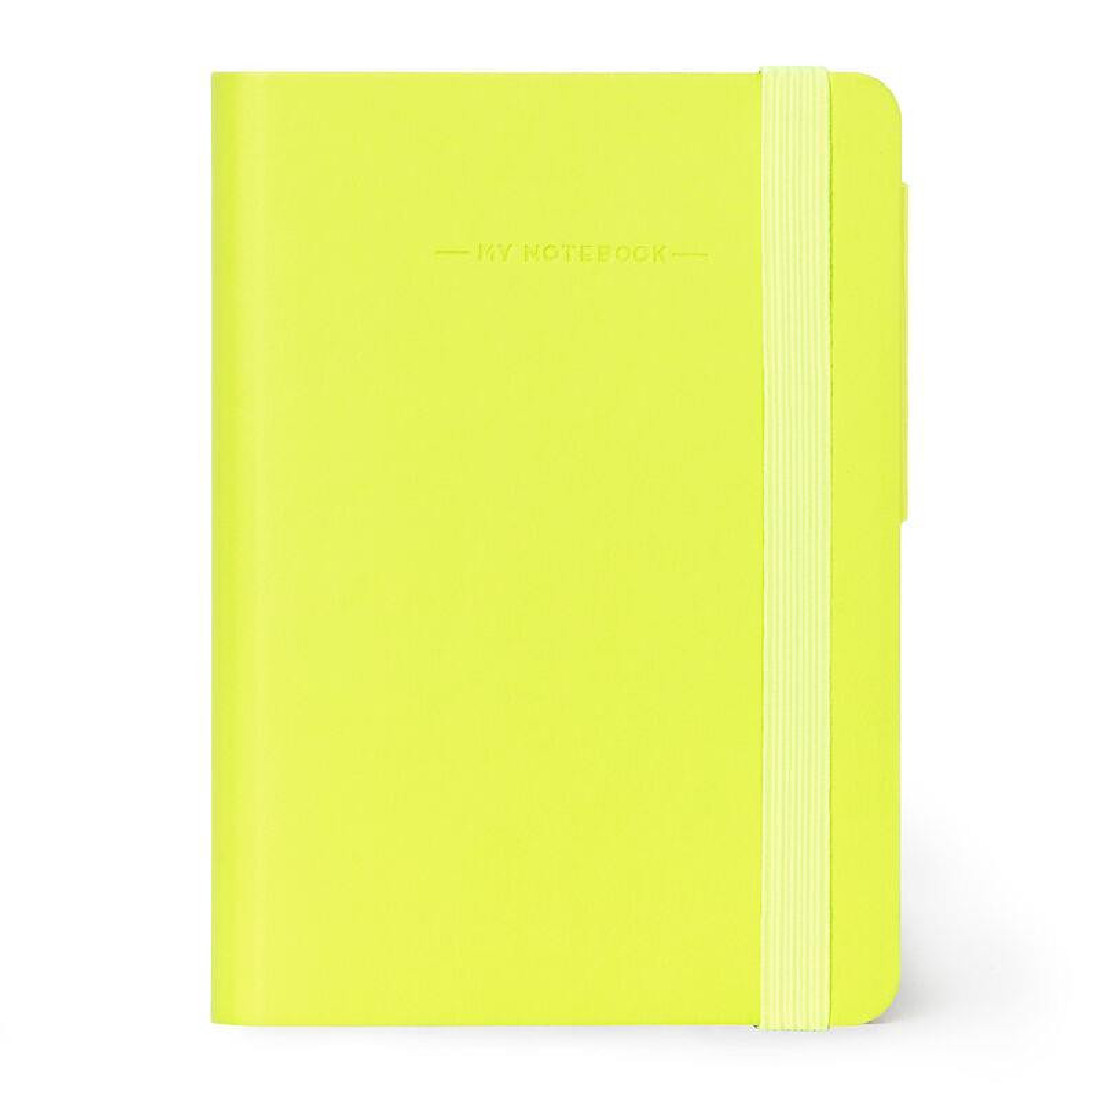 My Notebook - Lined - Small - Lime Green  Cover LEGAMI